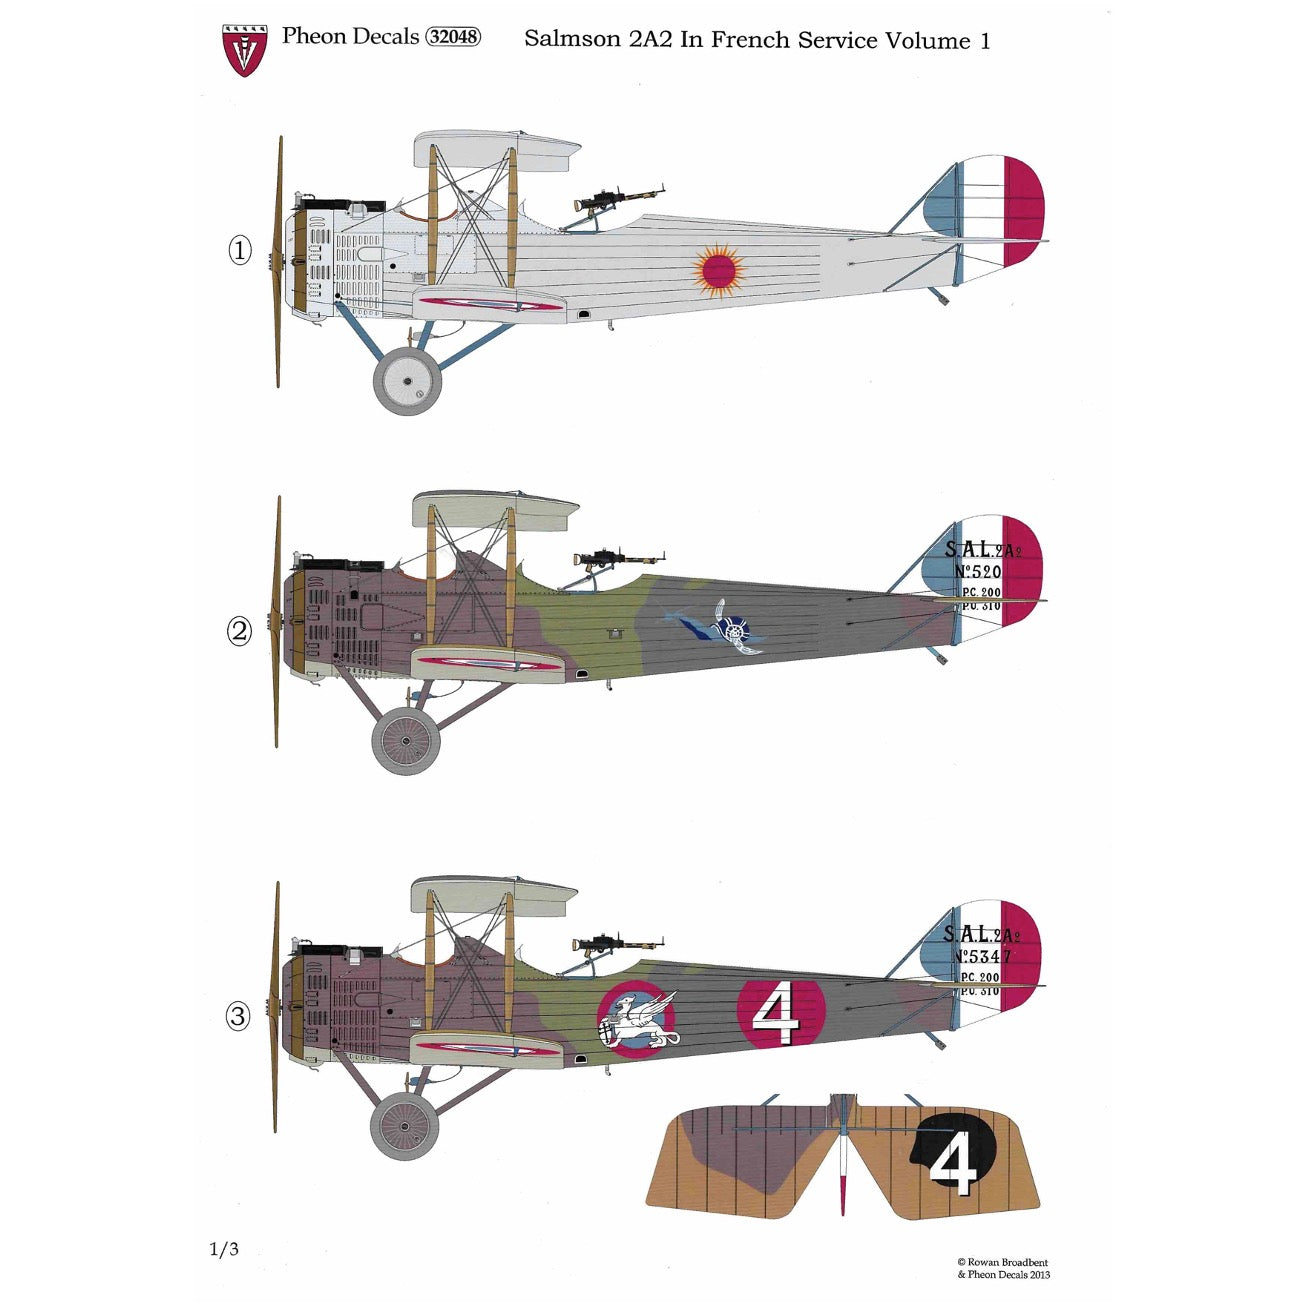 1/32 - Salmson 2A2 in French Service - Vol 1